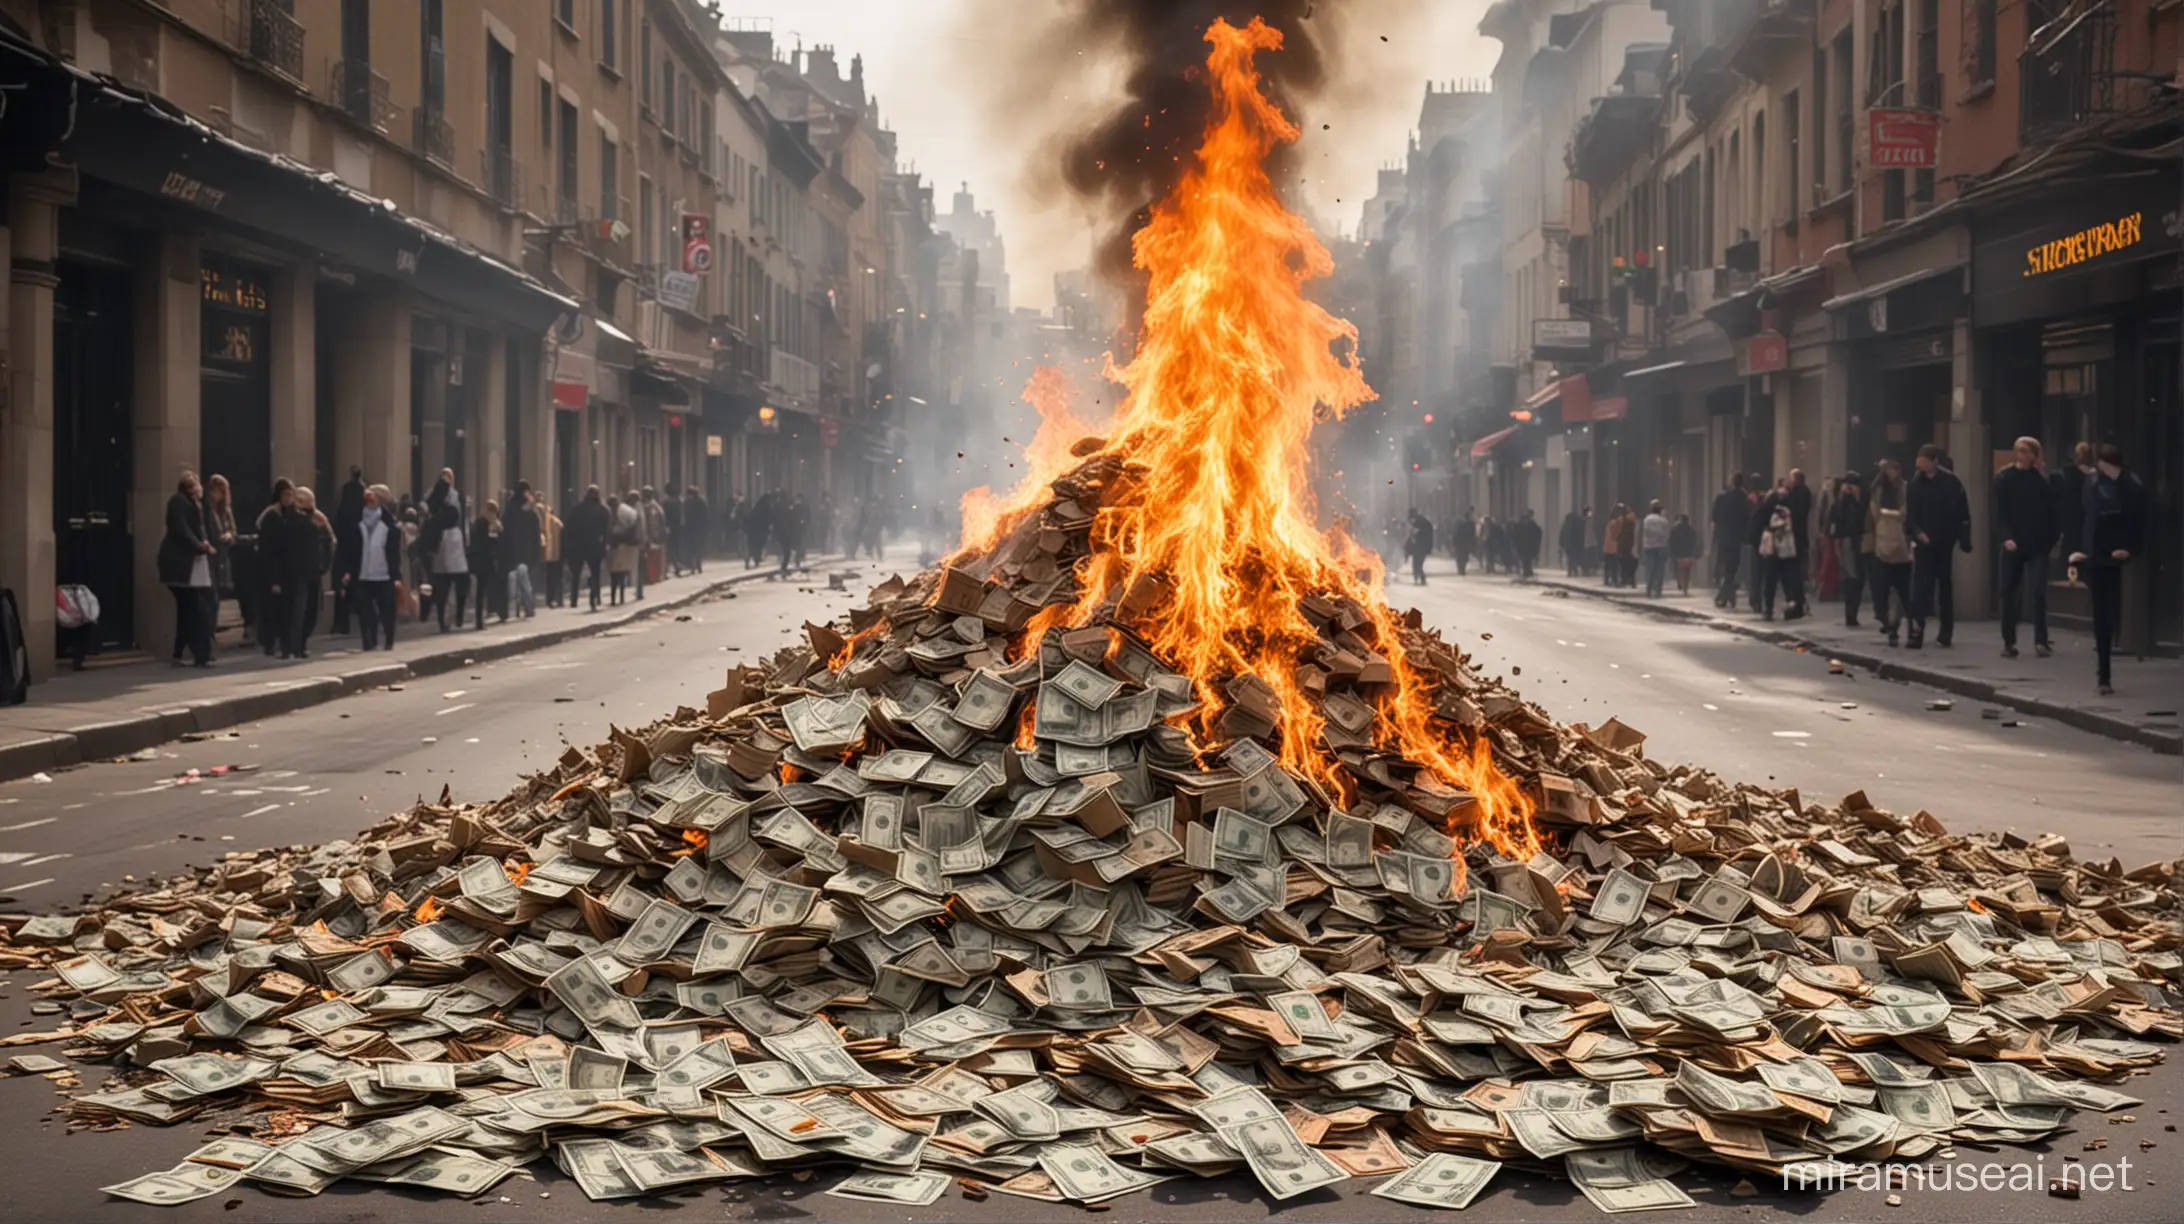 Flames Engulfing Stacks of Currency on Urban Streets